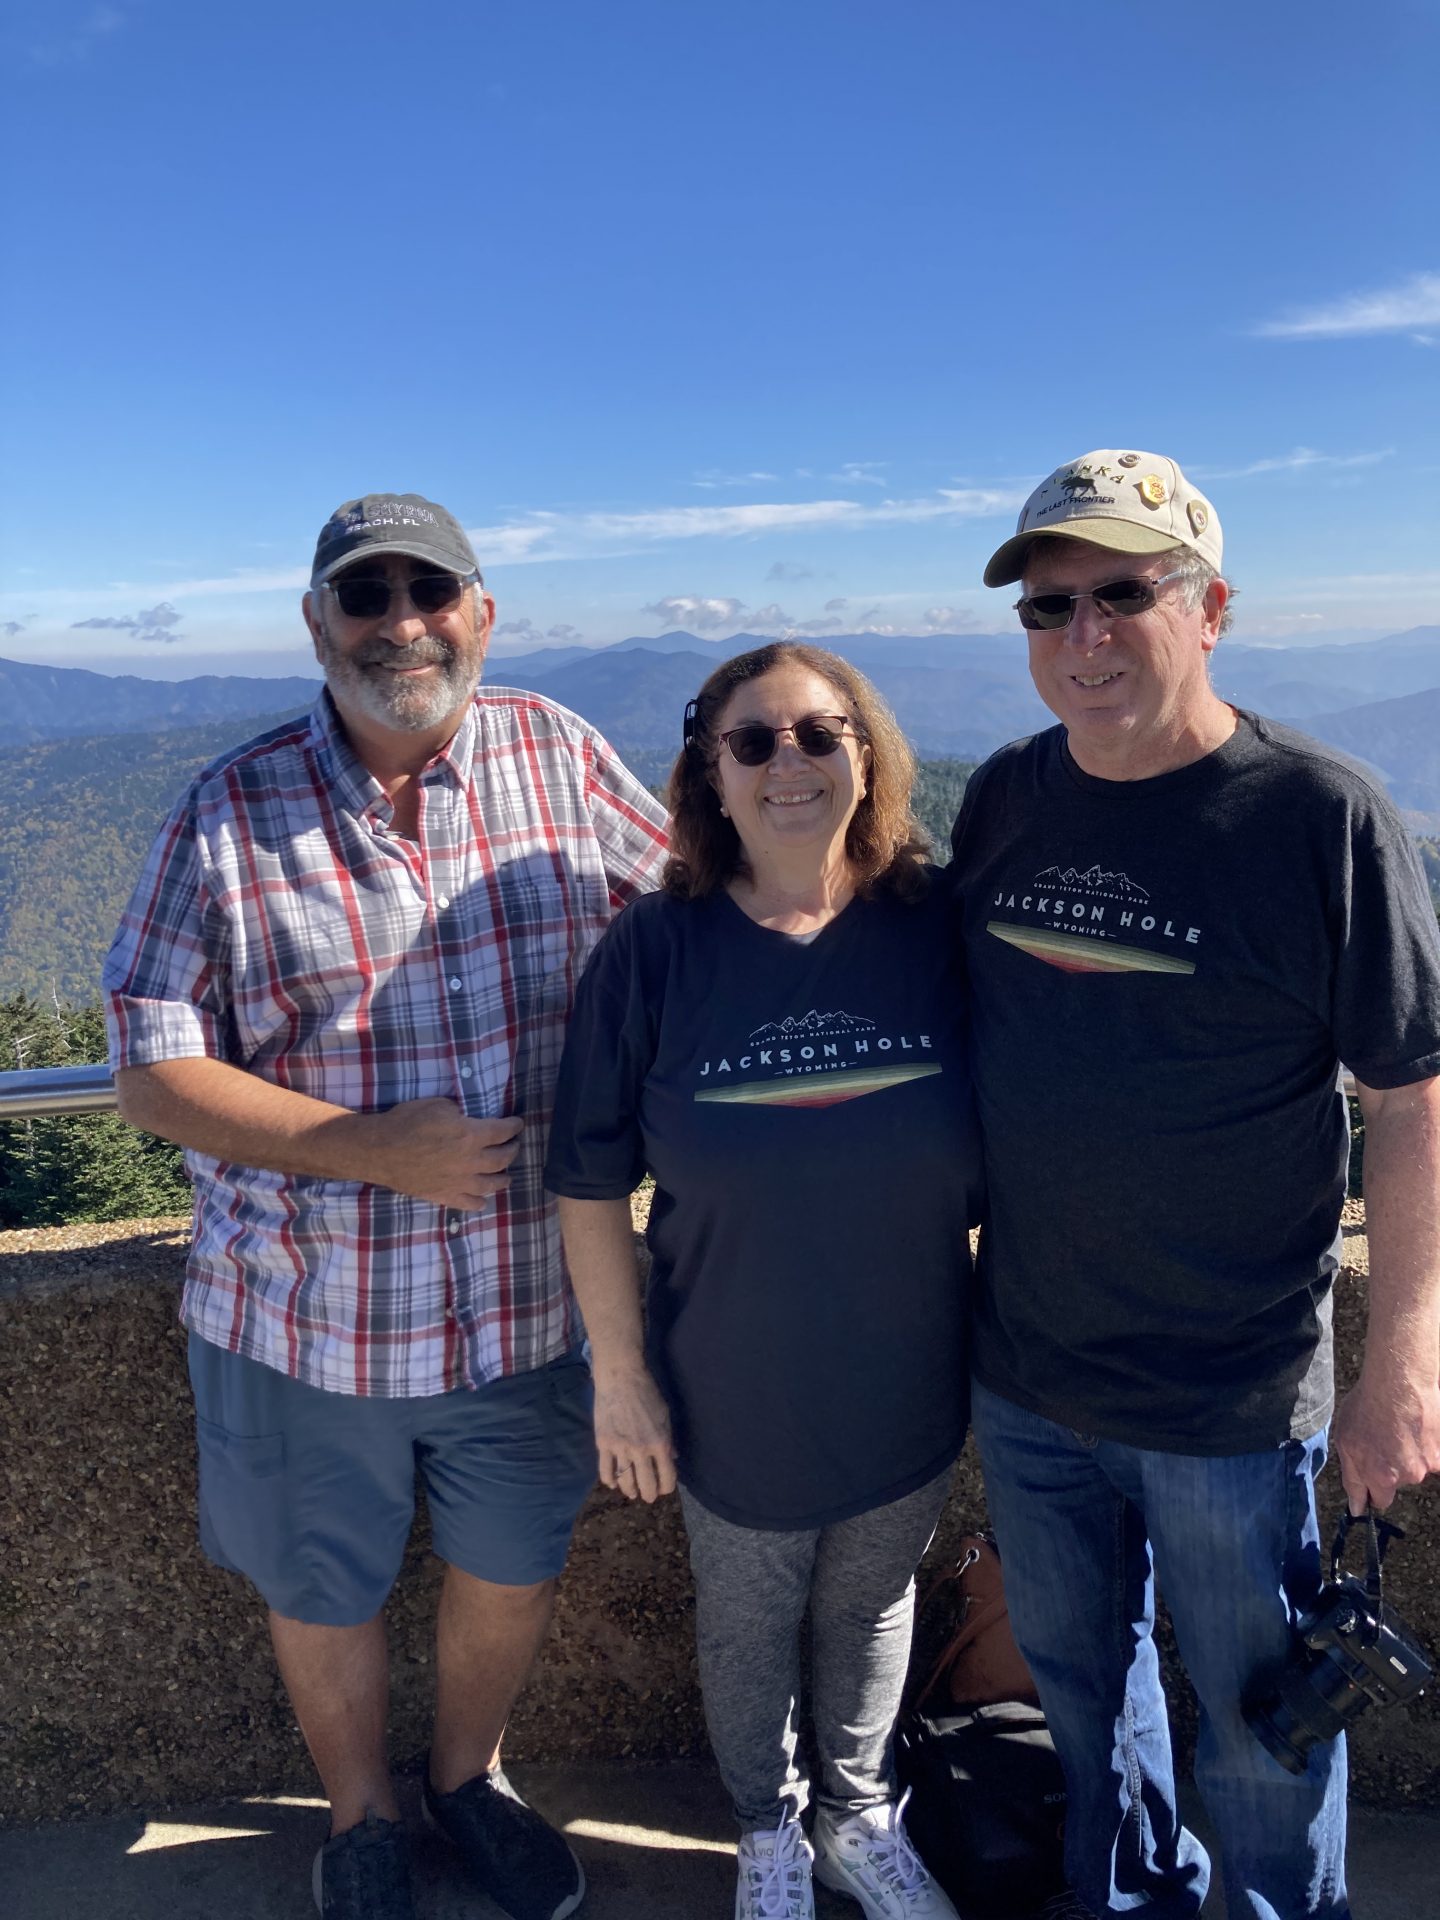 Clingmans Dome Great Smoky Mountains. Triumphantly made it to the top after hiking 1/2 mile STEEP incline!  We did it Alex  We will always treasure these fond memories 